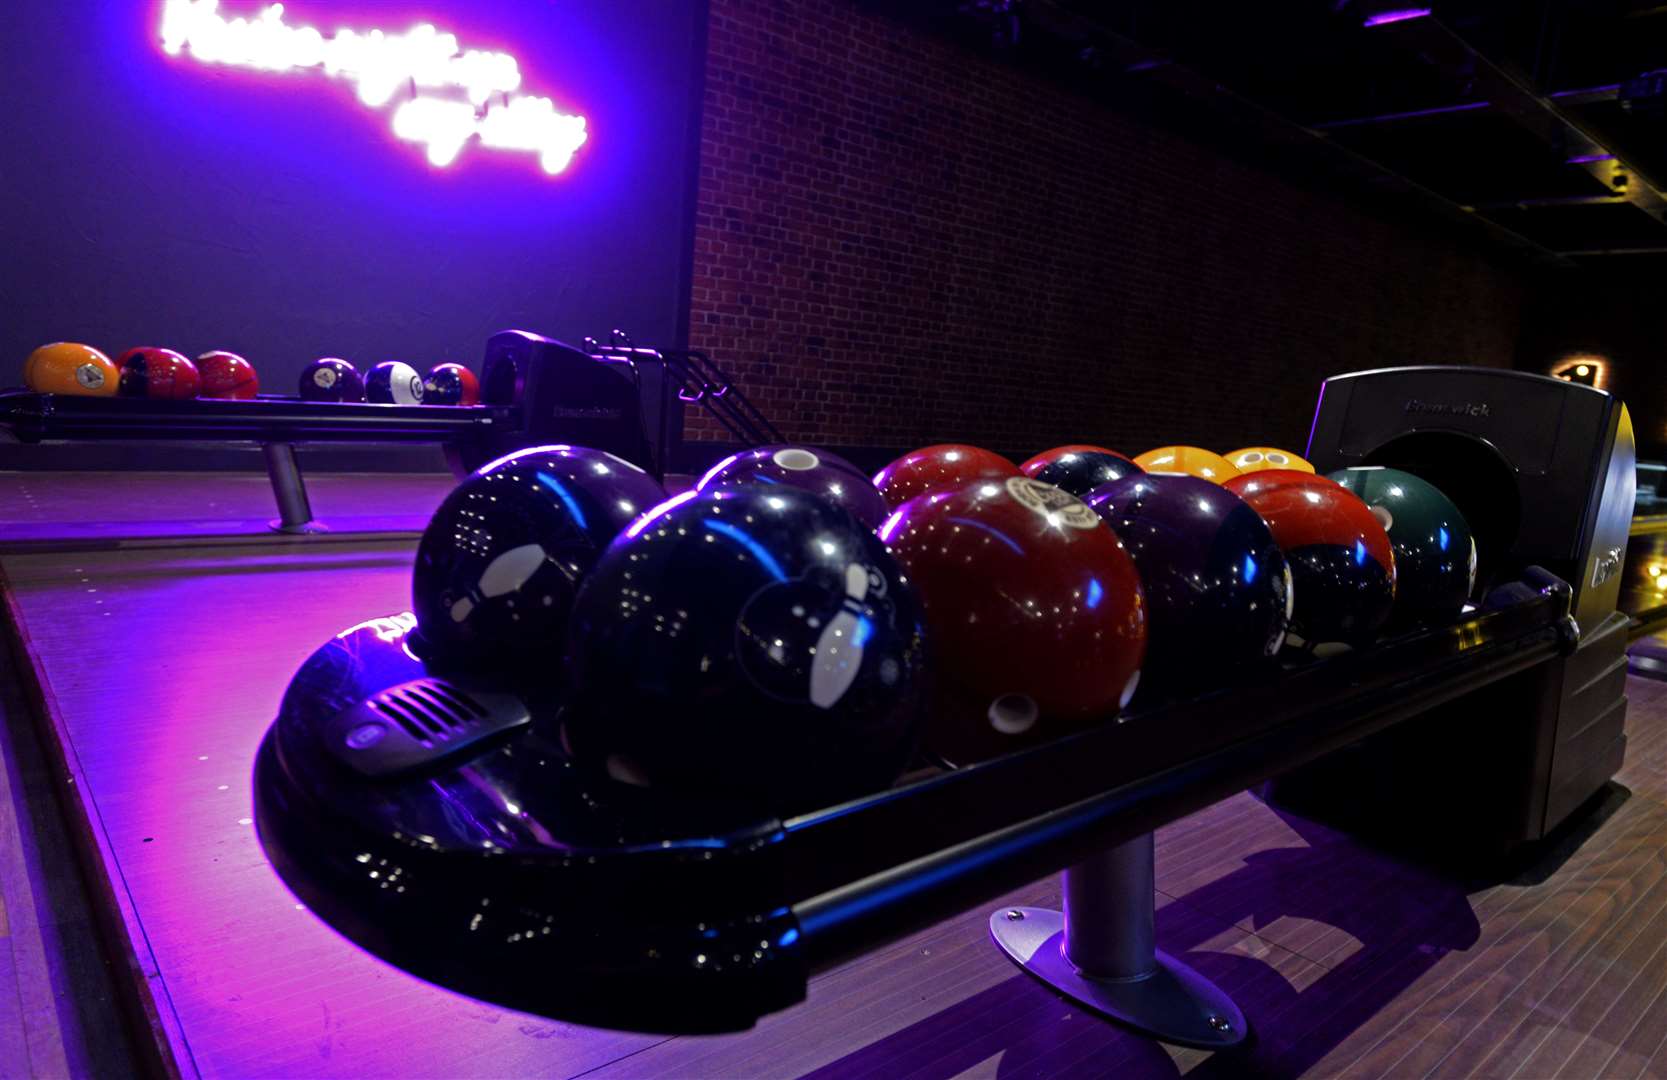 Bowling alleys along with indoor play centres are now steadily reopening